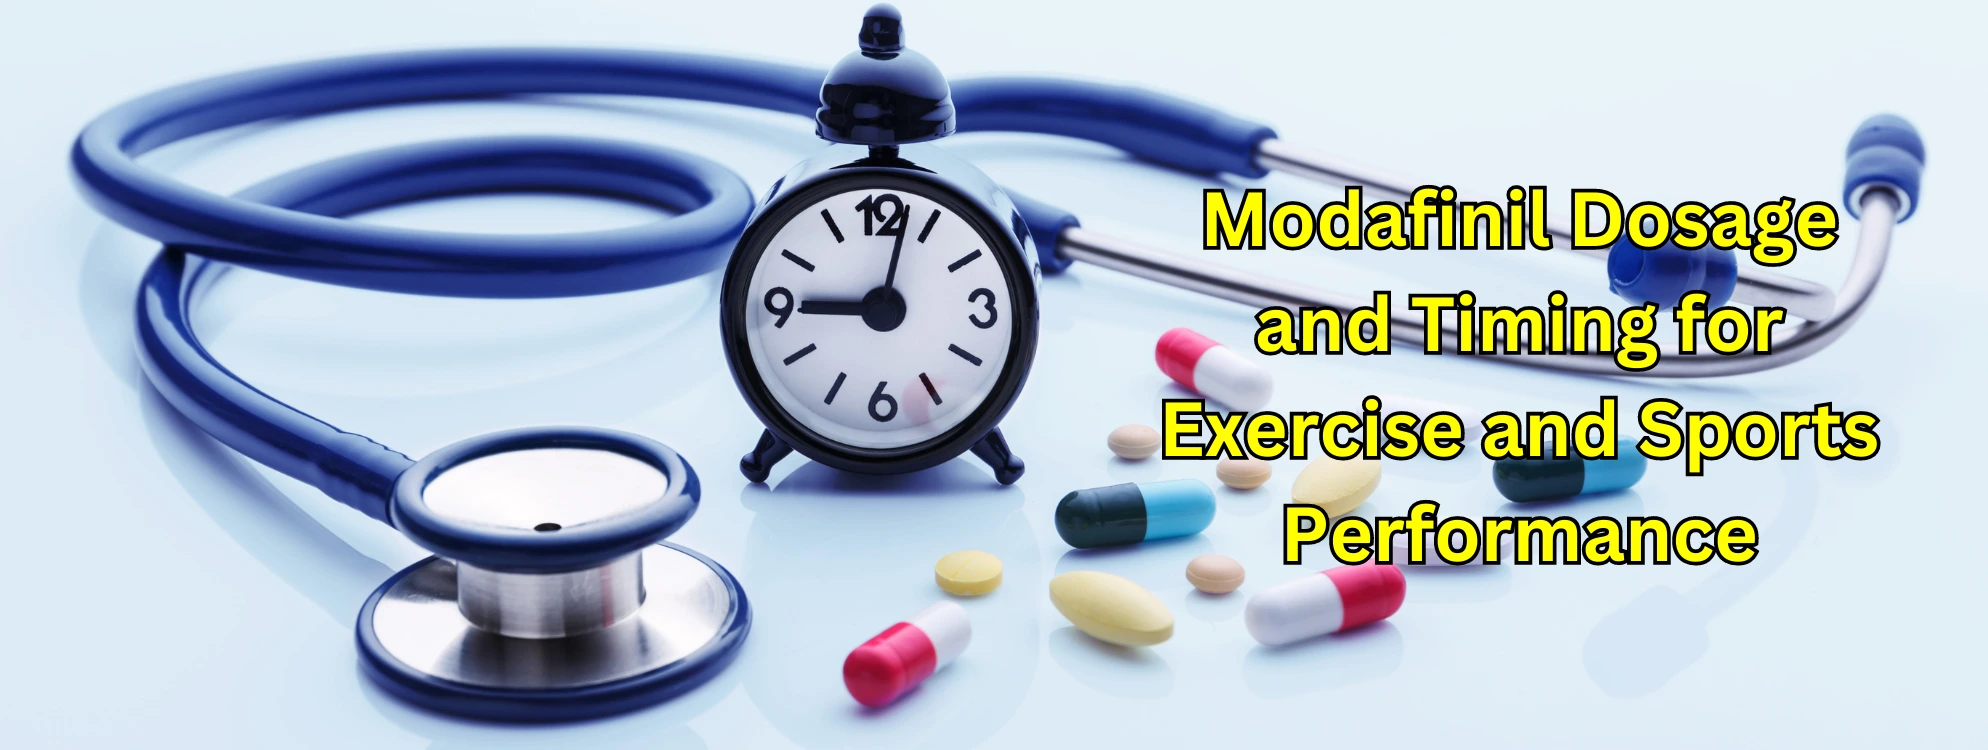 modafinil-dosage-and-timing-for-exercise-and-sports-performance